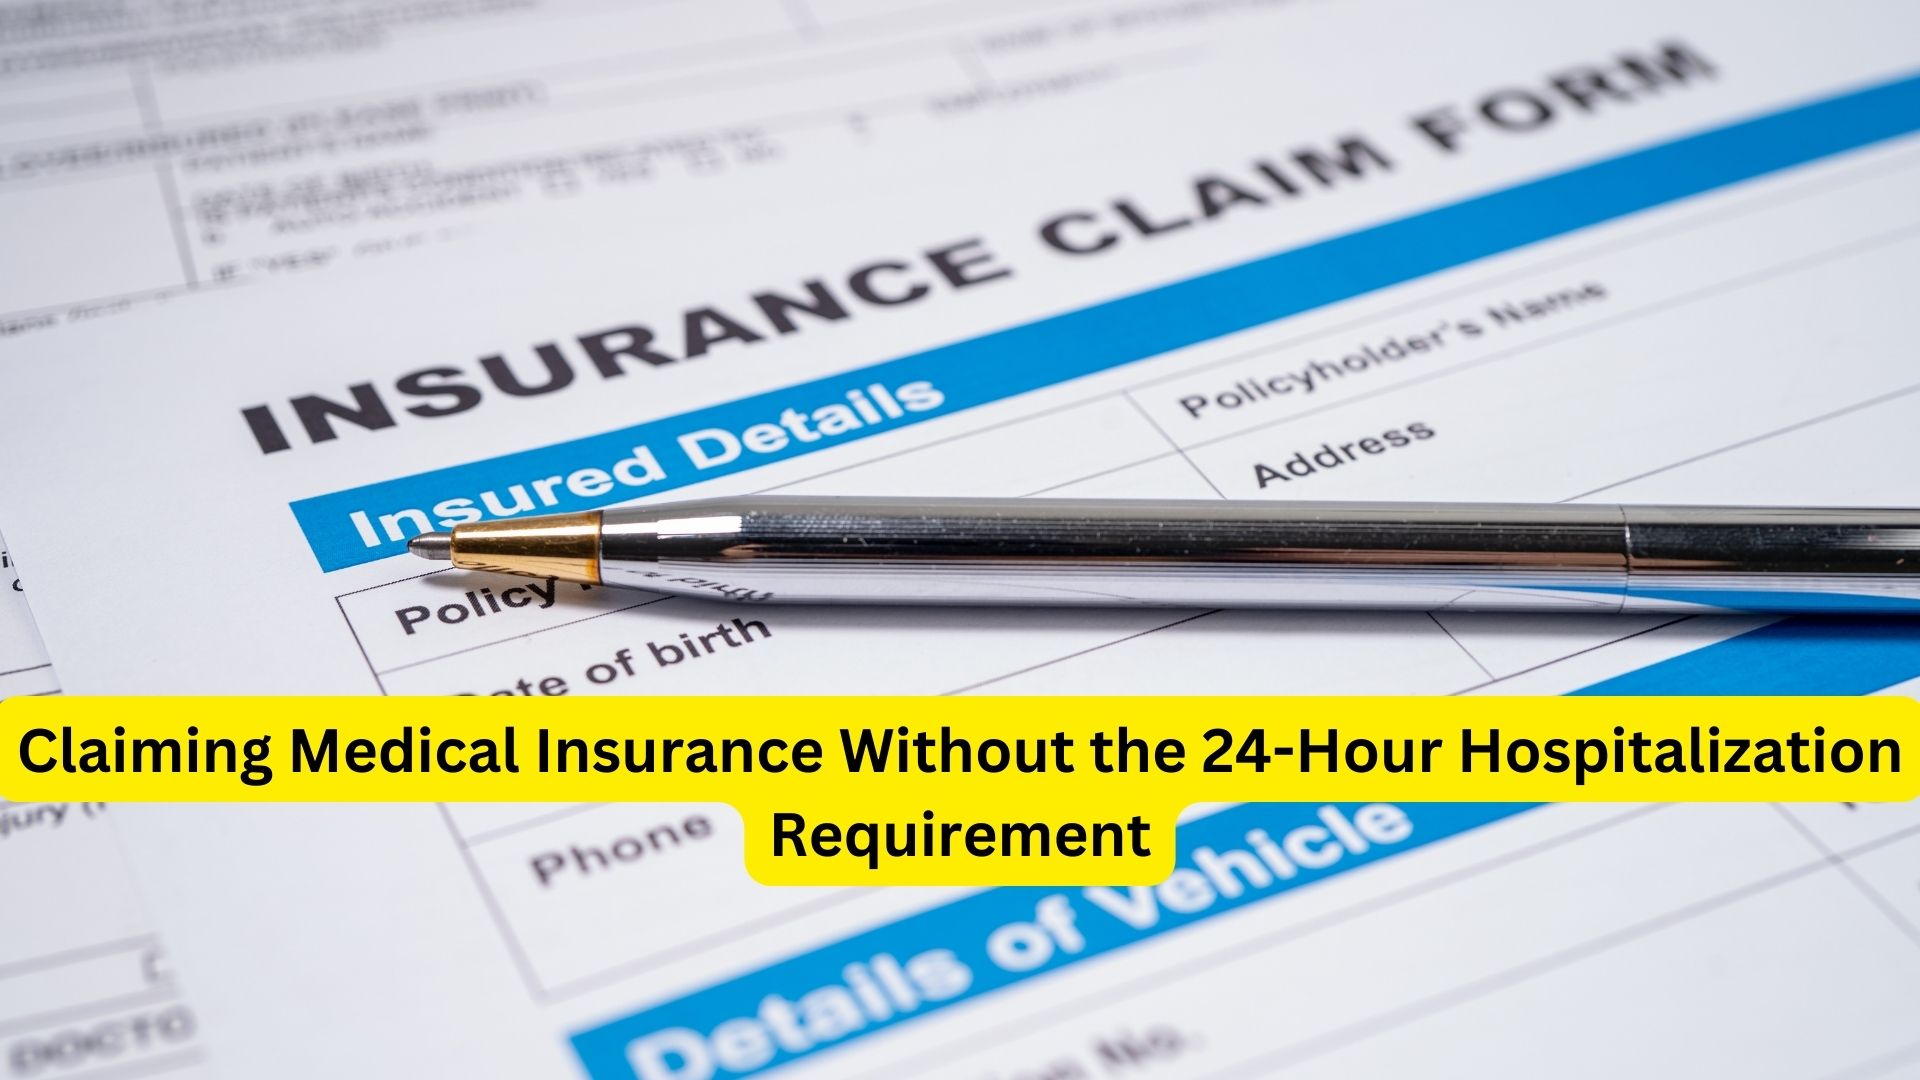 Claiming Medical Insurance Without the 24-Hour Hospitalization Requirement